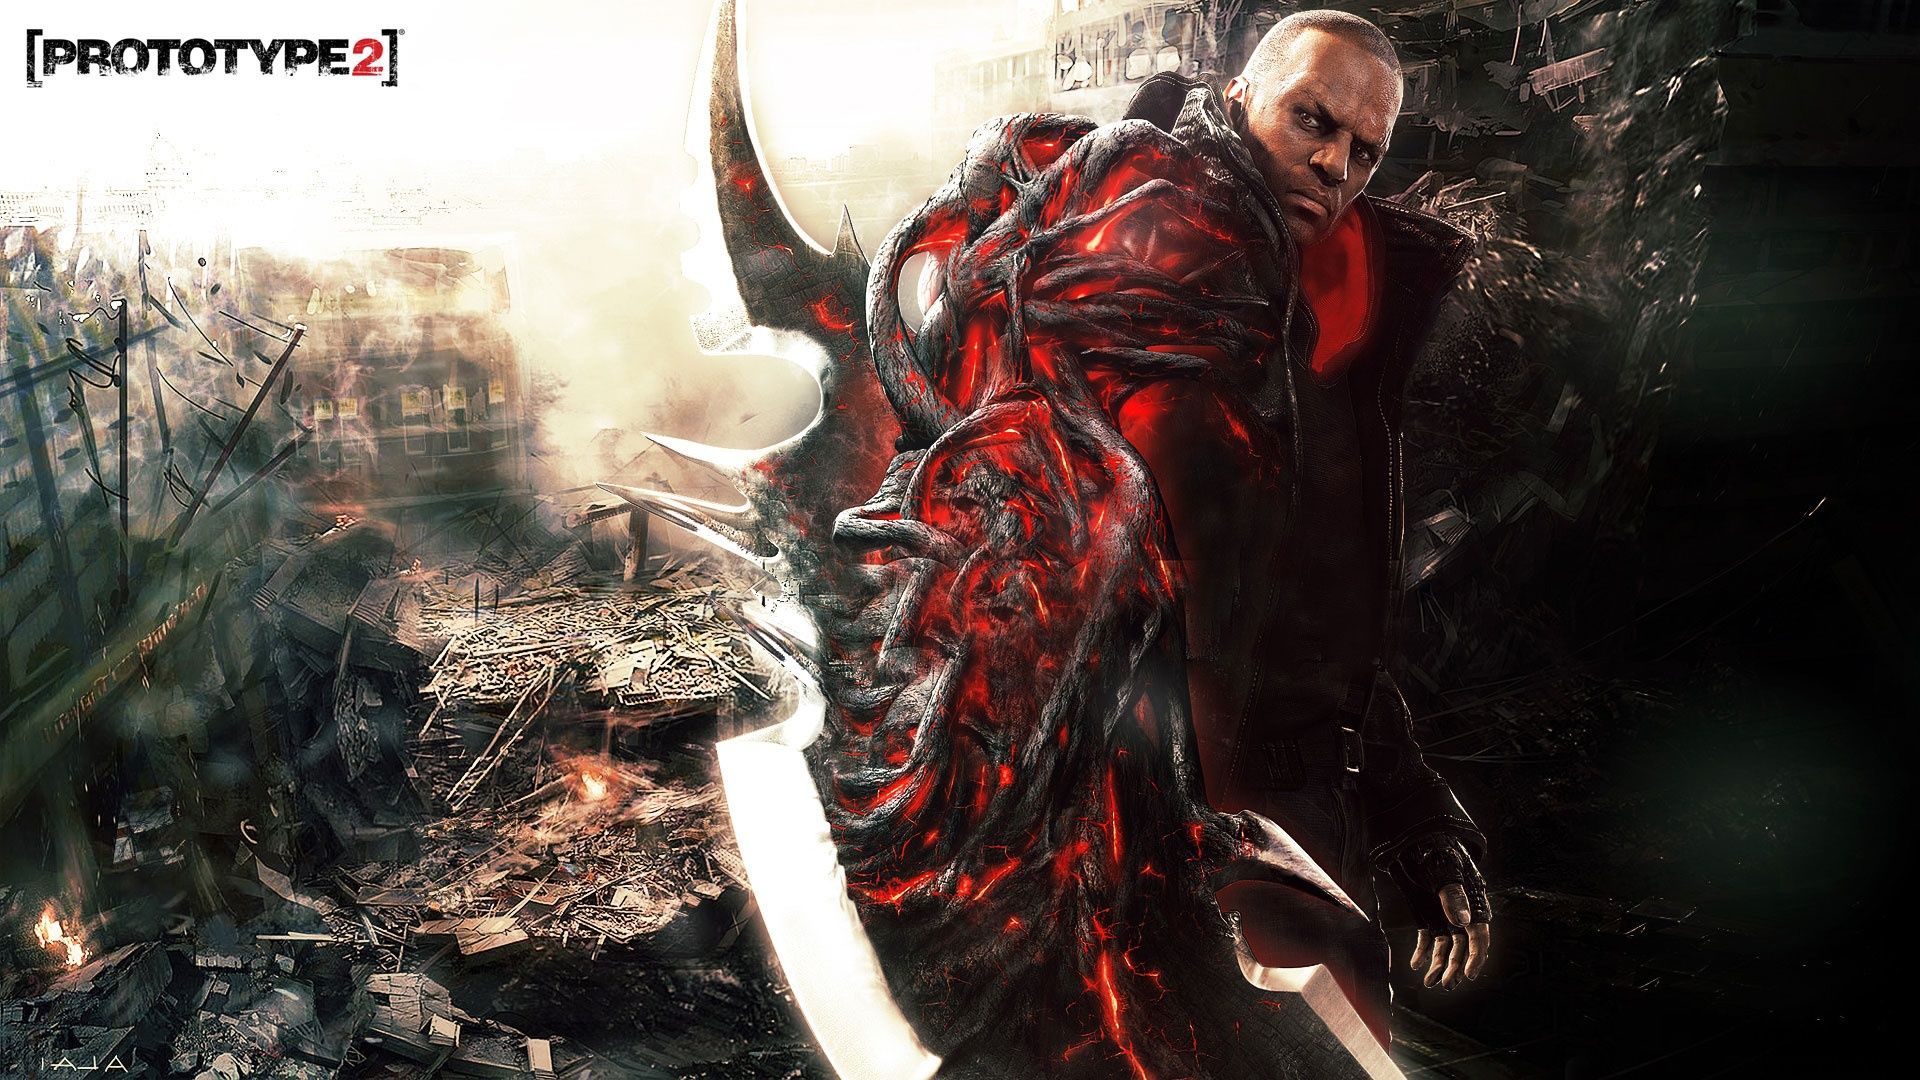 Prototype 2 Game Wallpapers HD Backgrounds